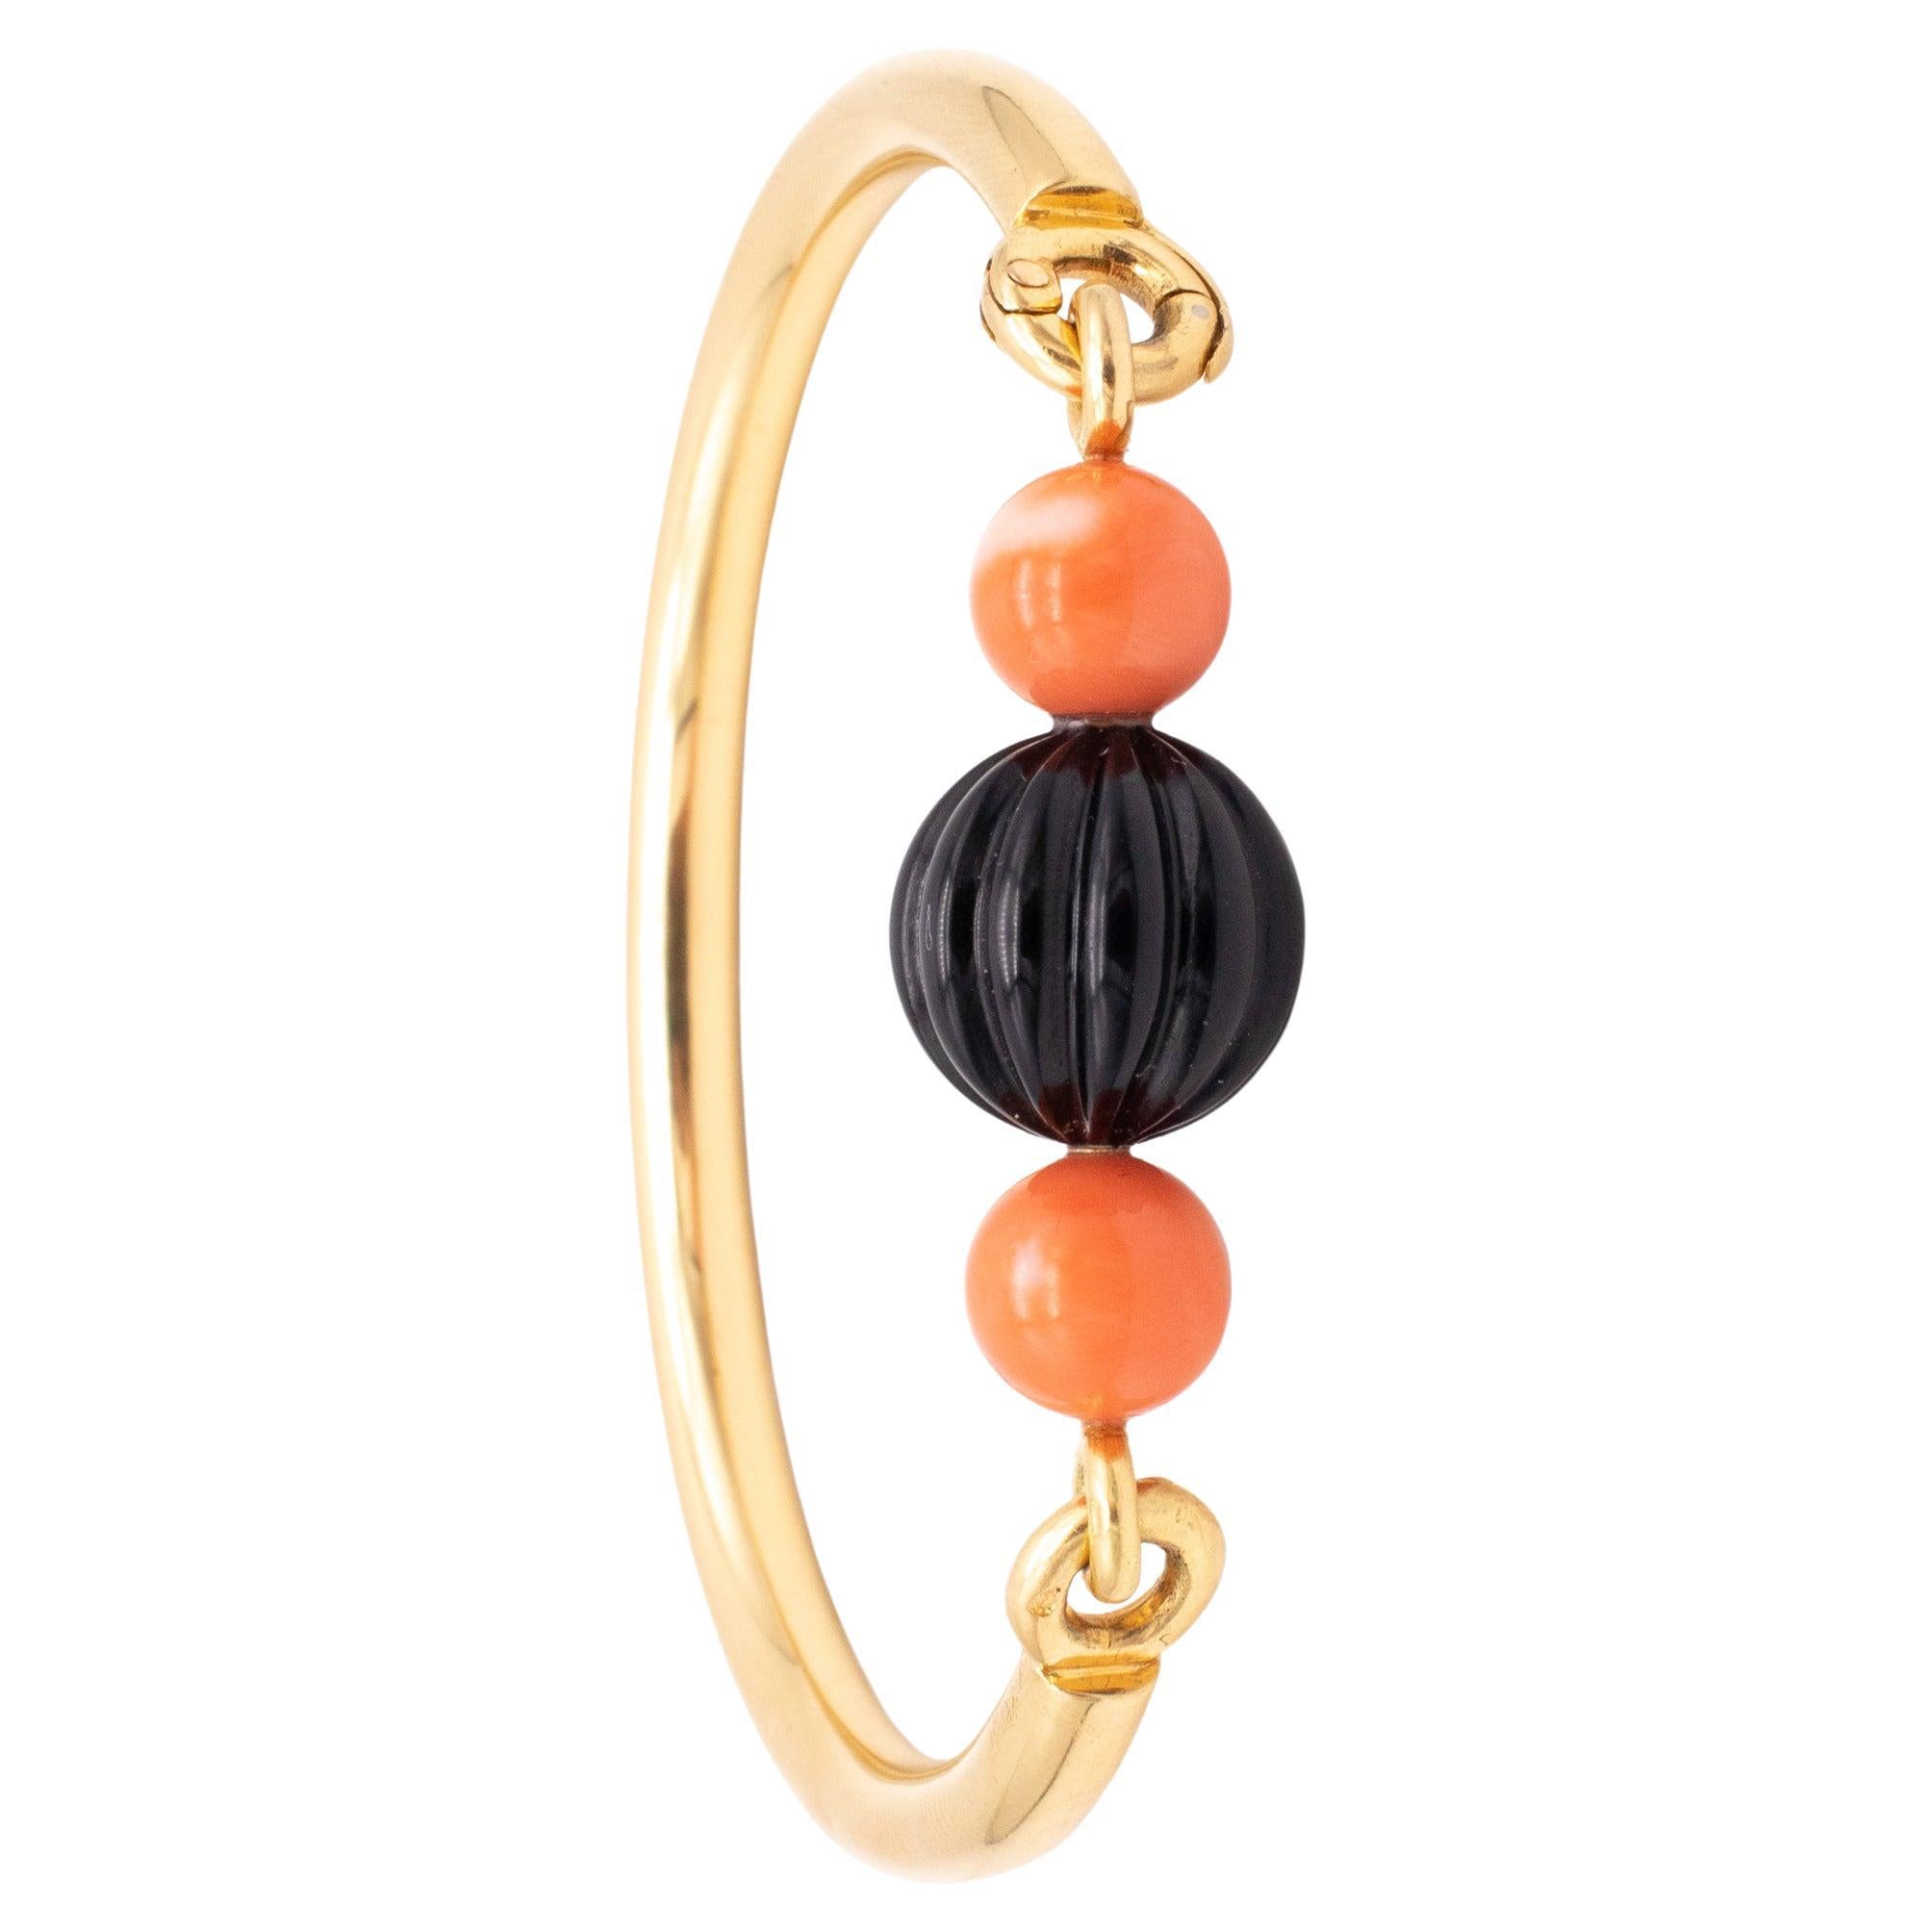 Boucheron 1970 Paris Colorful Bracelet in 18Kt Yellow Gold with Coral and Onyx